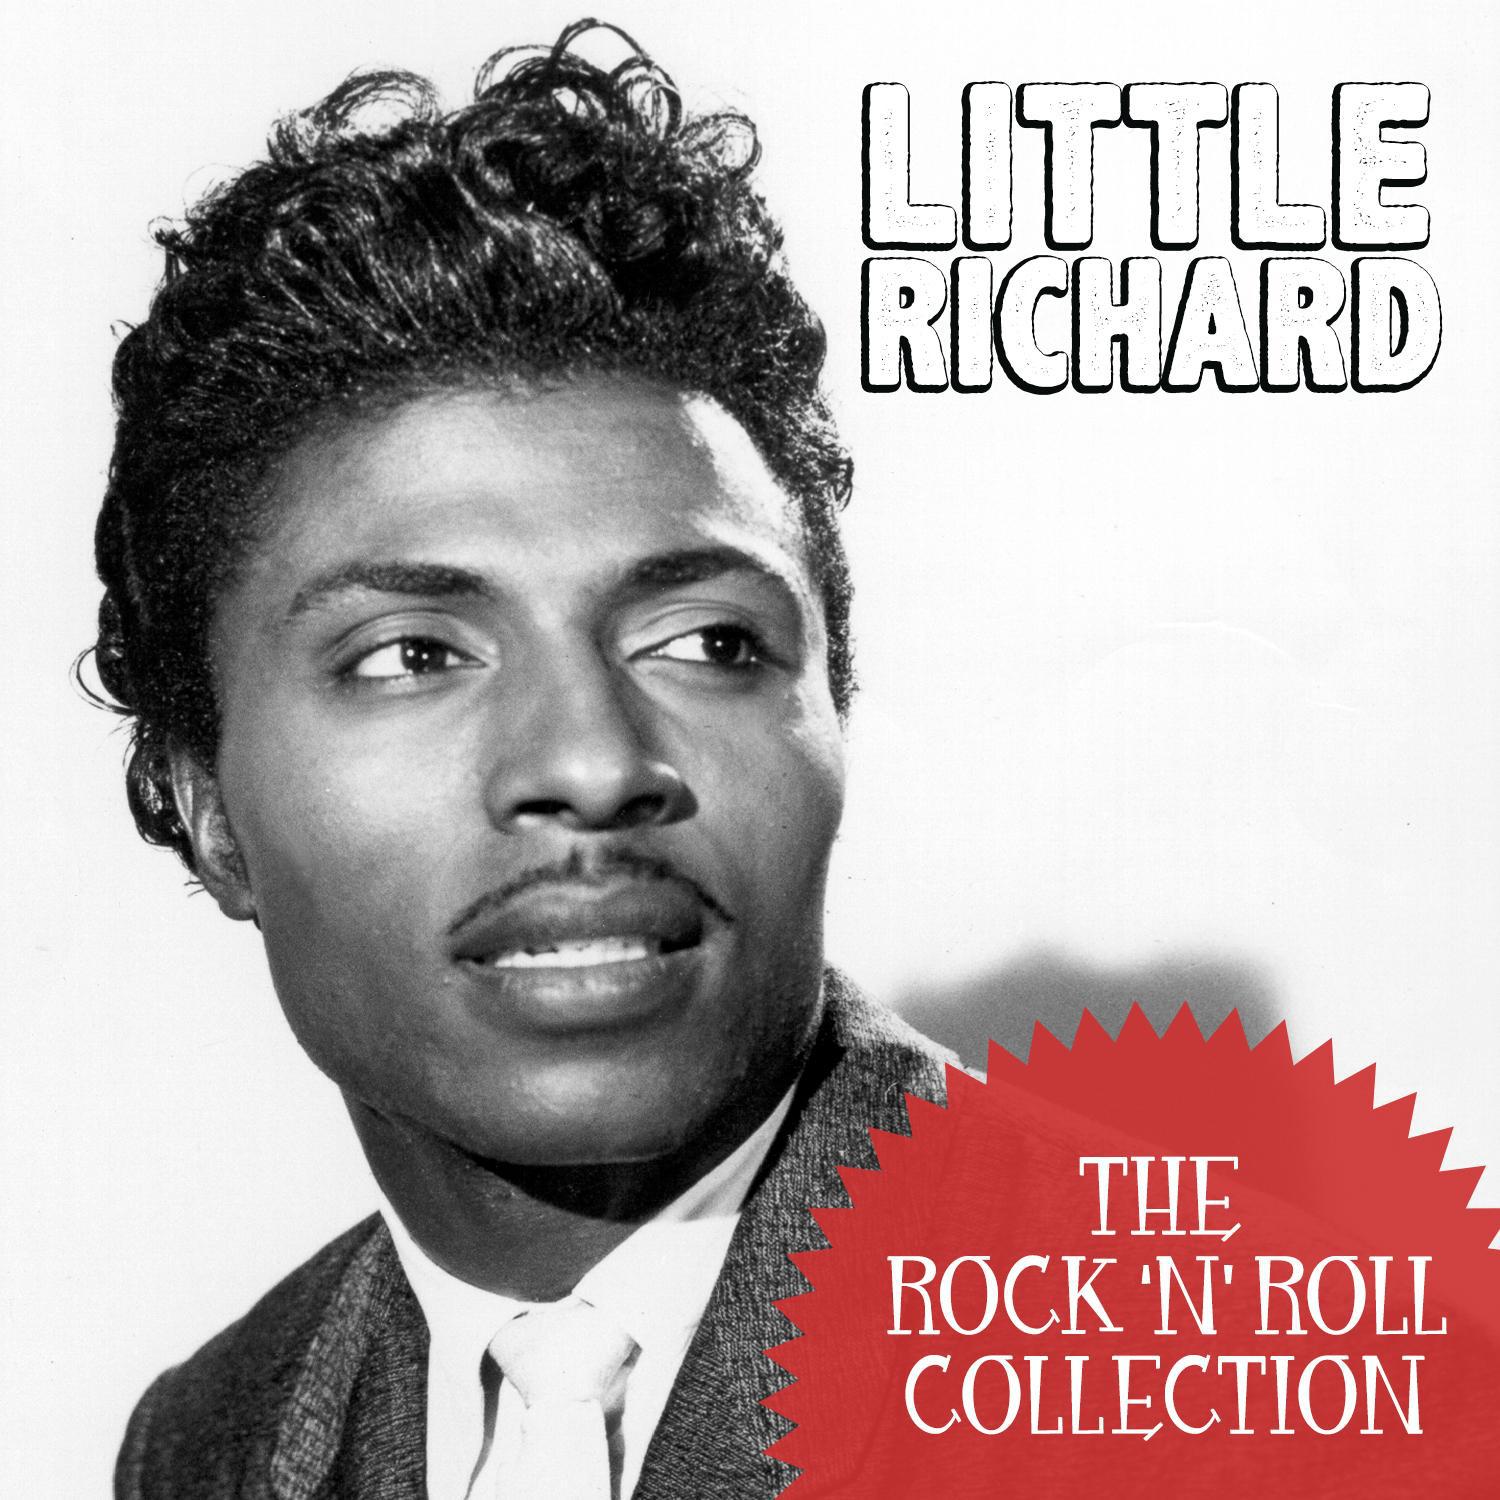 The Rock 'N' Roll Collection: Little Richard